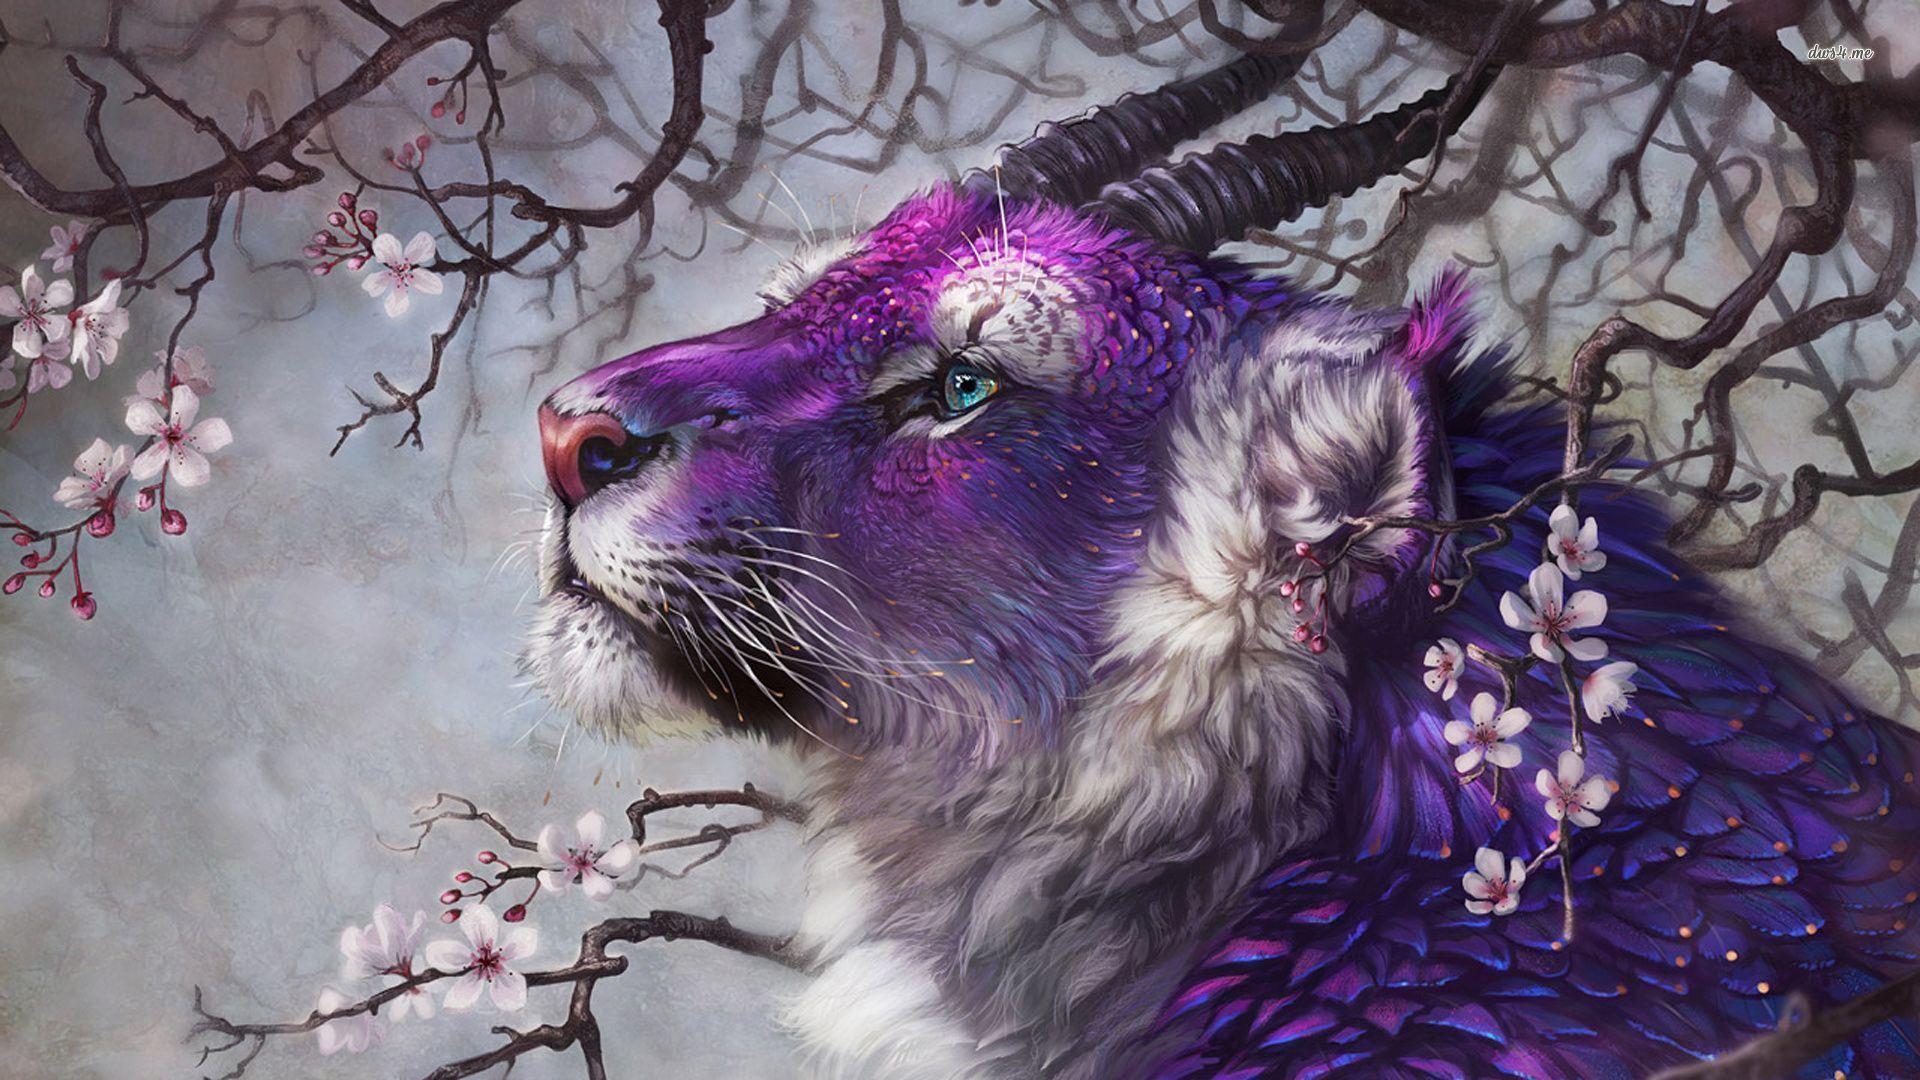 Beautiful Mythical Creatures Wallpapers